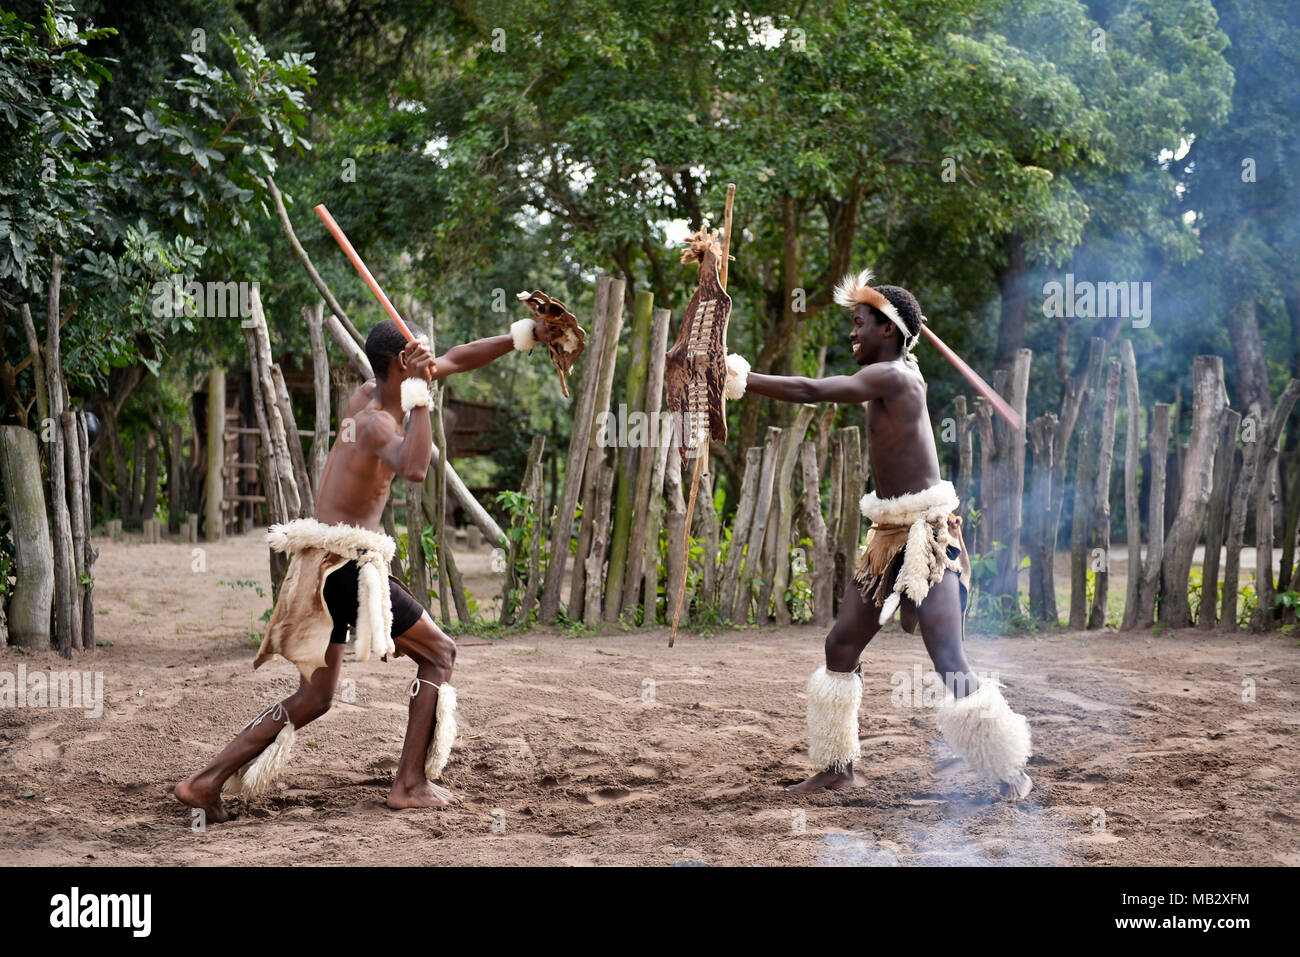 St. Lucia- South Africa - June 25, 2017: Zulu warrior in traditional dress with ighting spear in Khula Zulu Village in South Africa Stock Photo